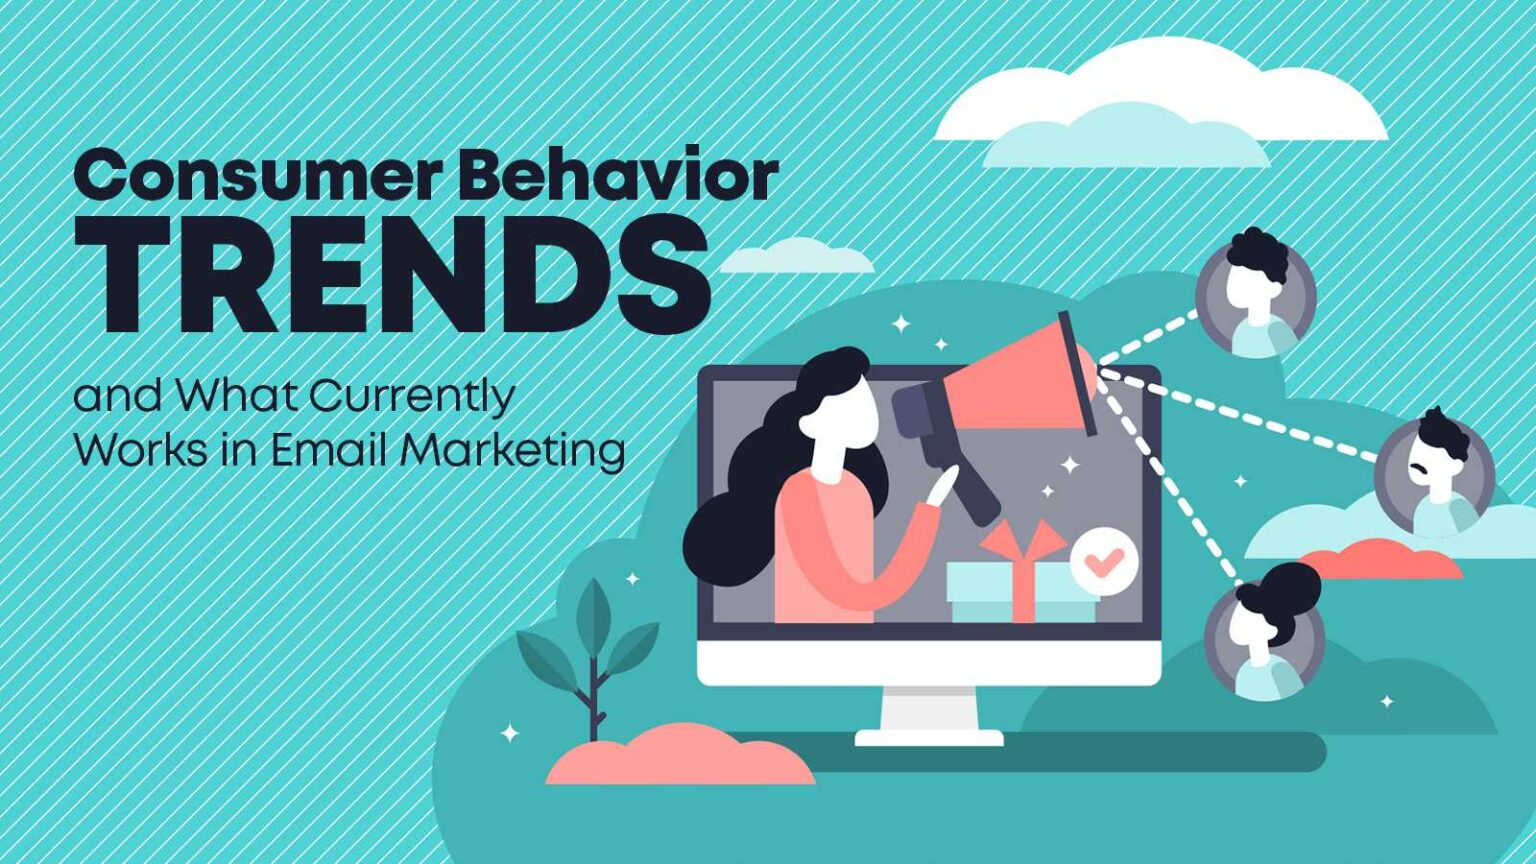 Consumer Behavior Trends to Look Out for in Email Marketing